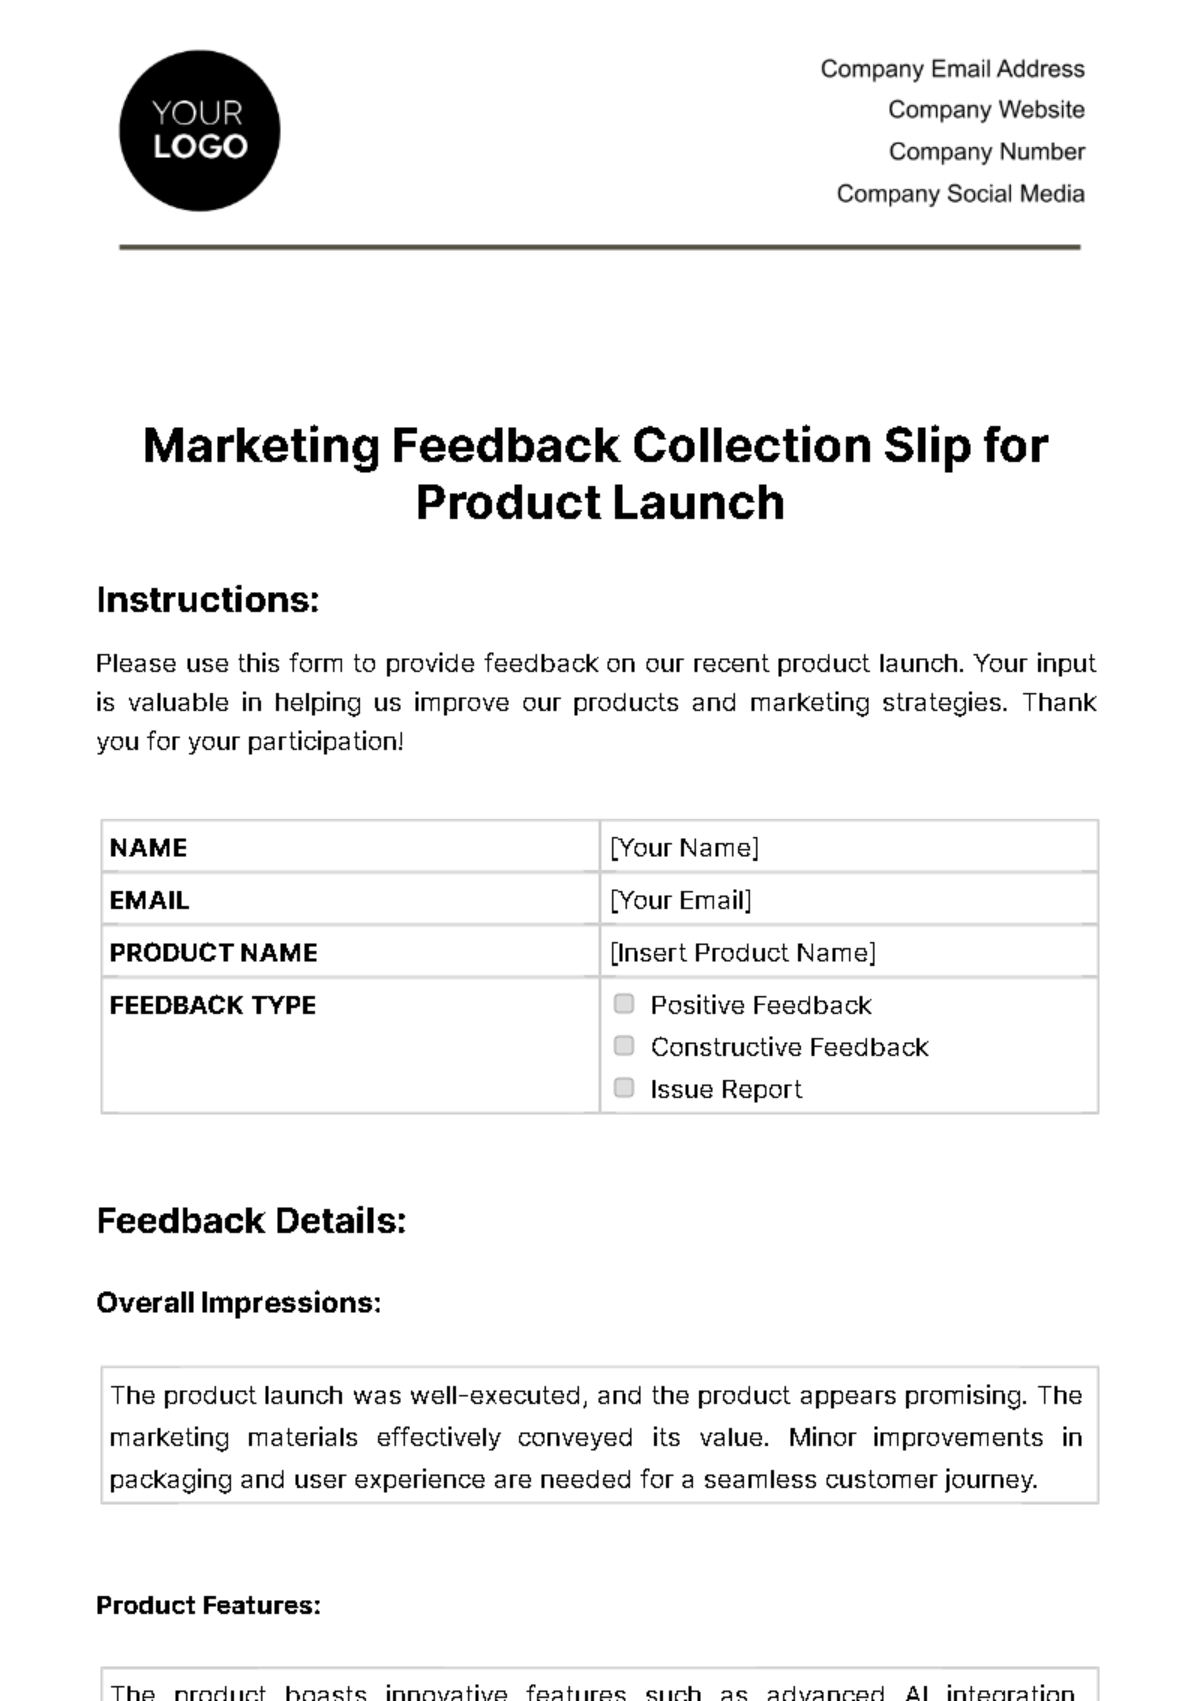 Free Marketing Feedback Collection Slip for Product Launch Template